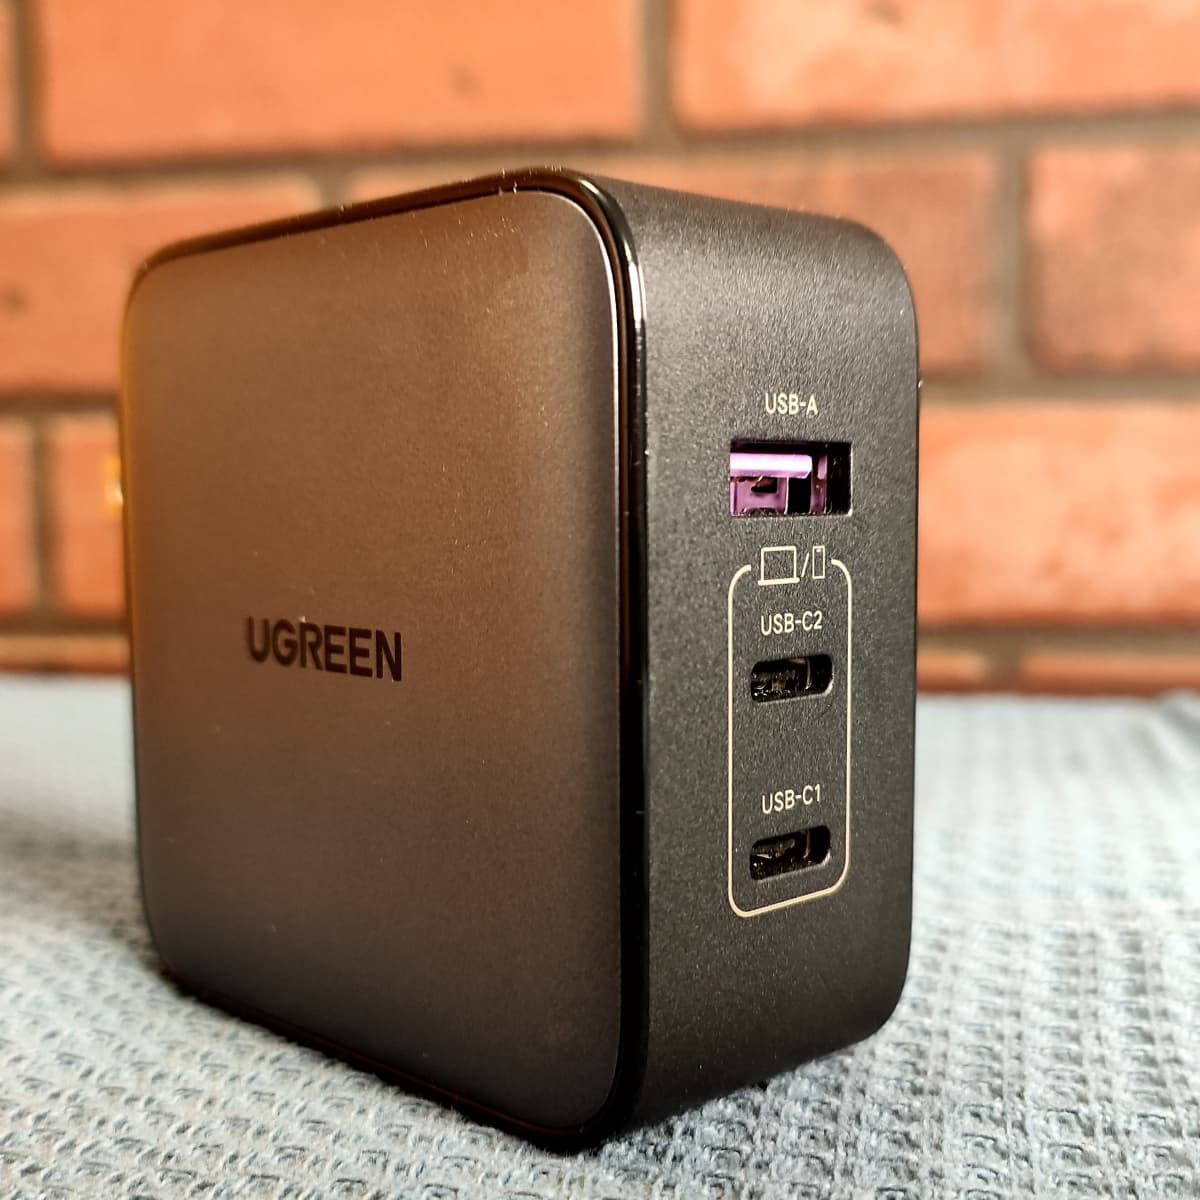 UGREEN 65W GaN Charger Review